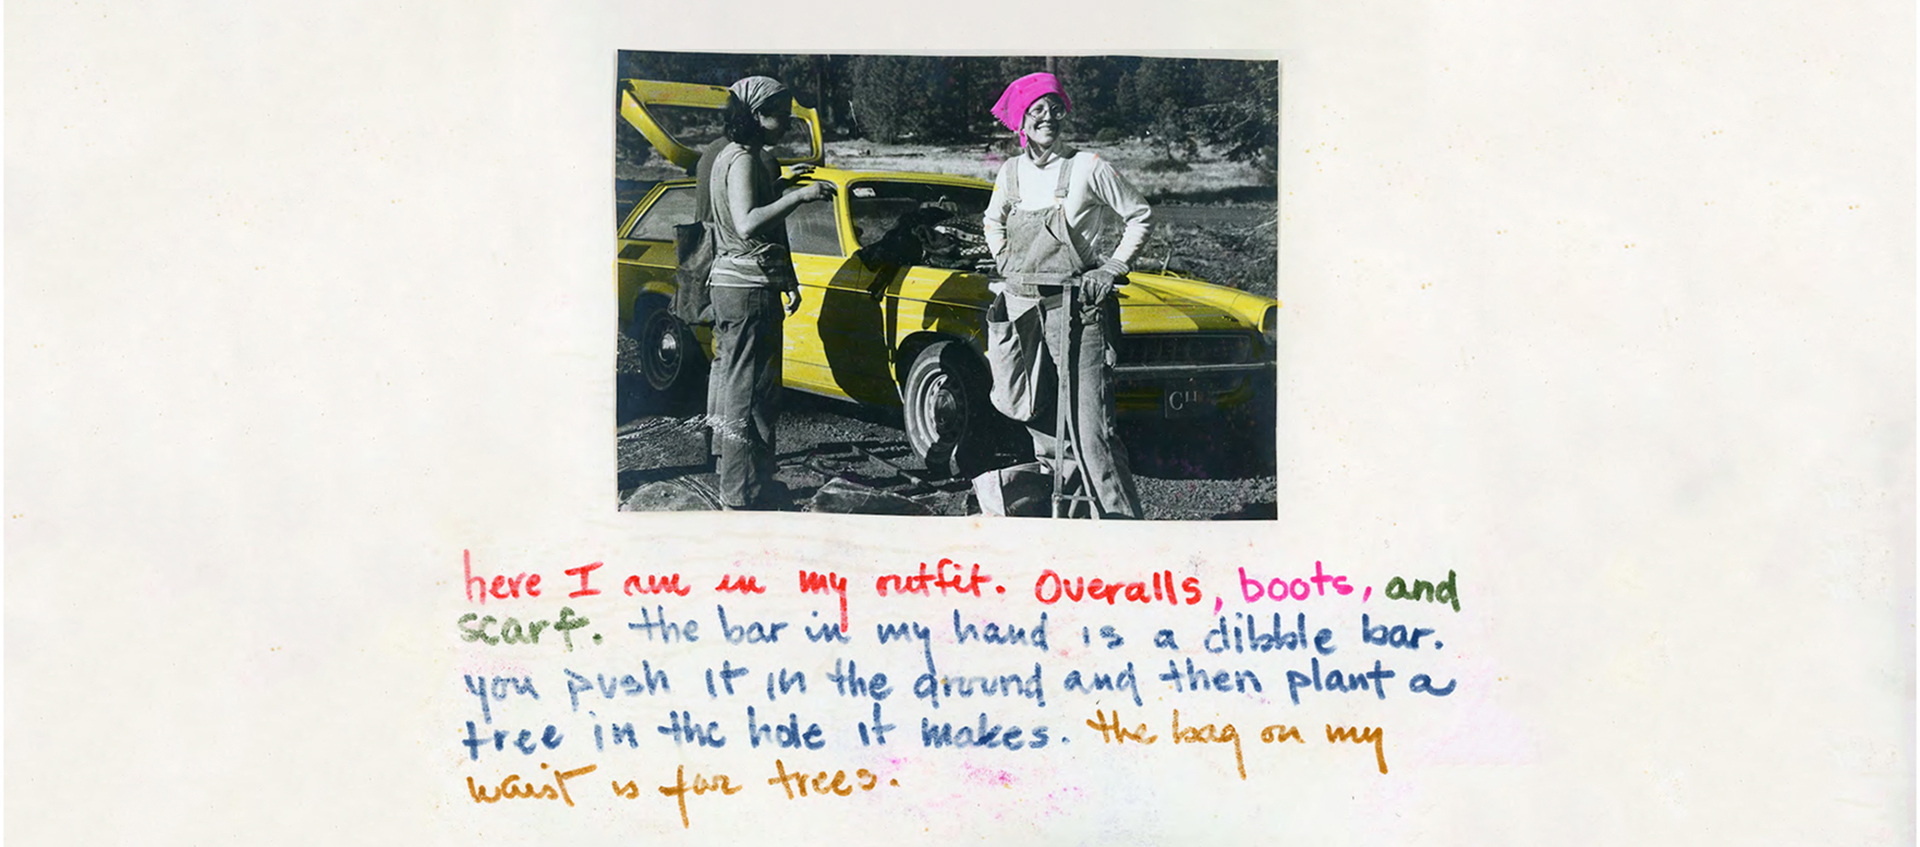 Scrapbook page with a colorized photograph of two women standing in front of a car. A colorful, handwritten caption below the photo reads: “here I am in my outfit. Overalls, boots, and scarf. the bar in my hand is a dibble bar. you push it in the ground and then plant a tree in the hole it makes. the bag on my waist is for trees.”